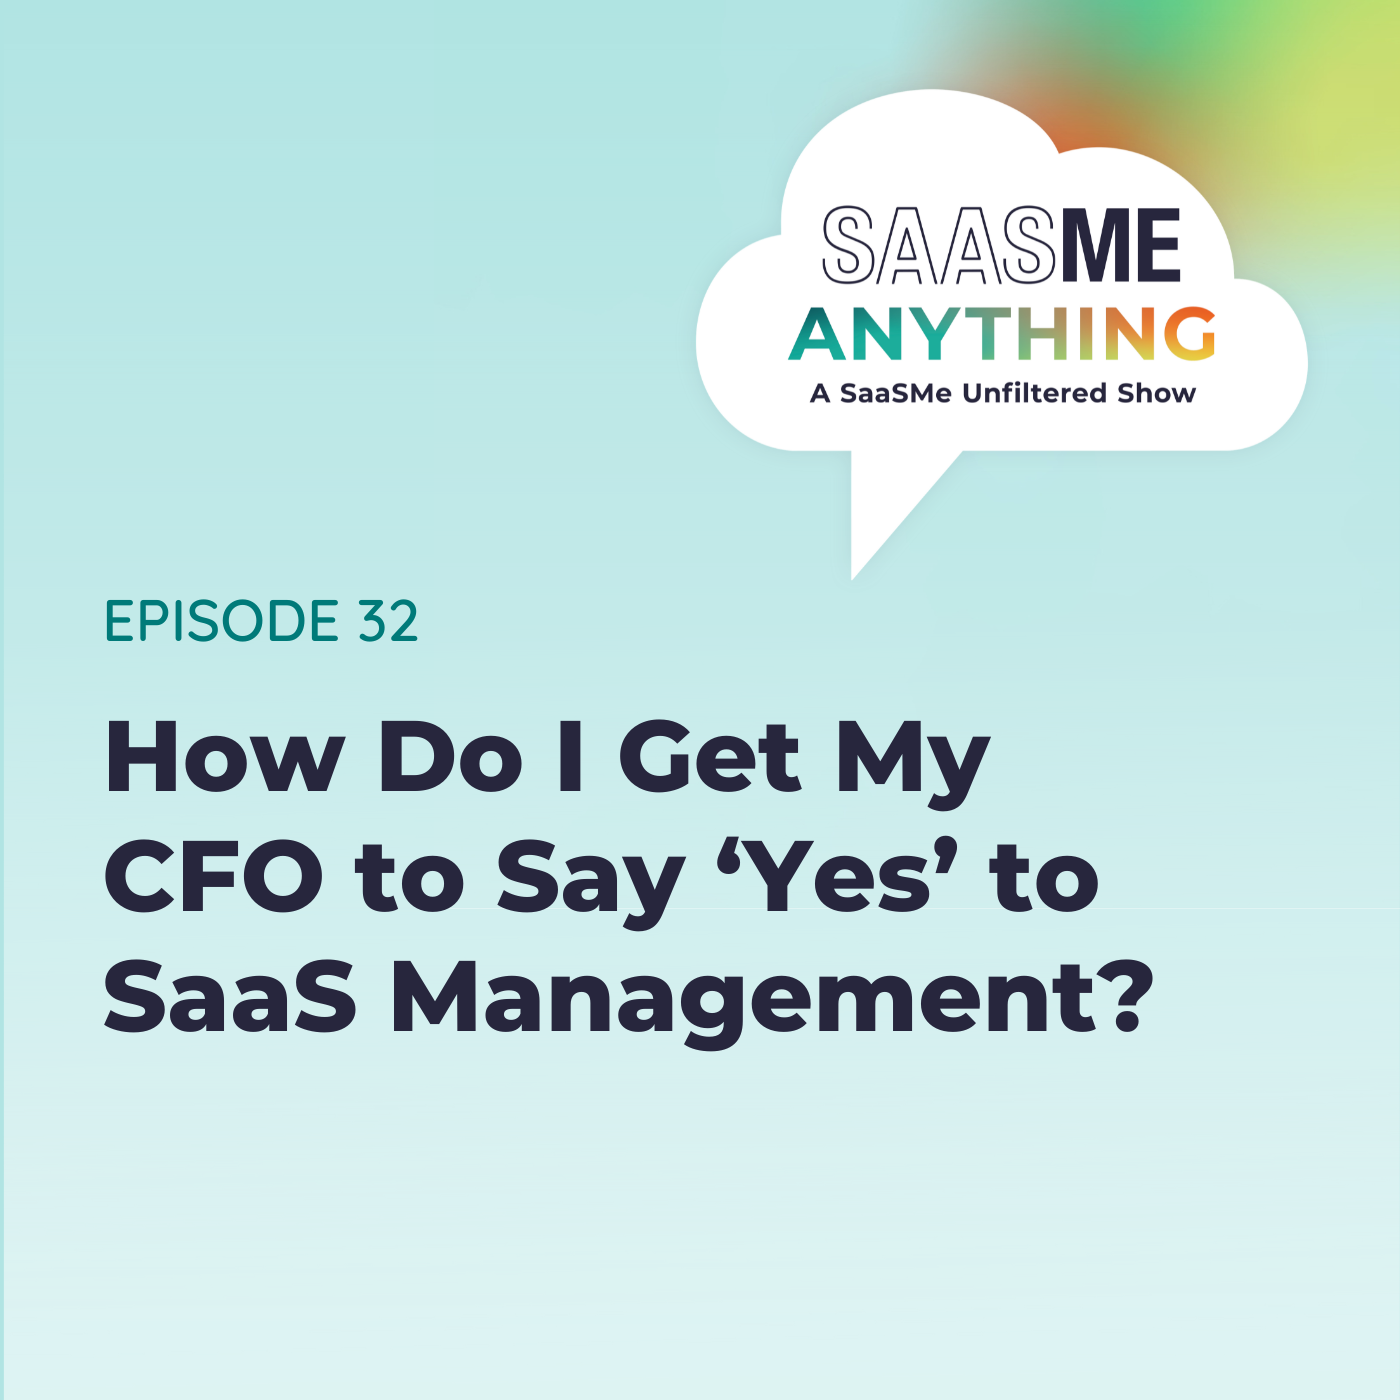 How Do I Get My CFO to Say 'Yes' to SaaS Management?